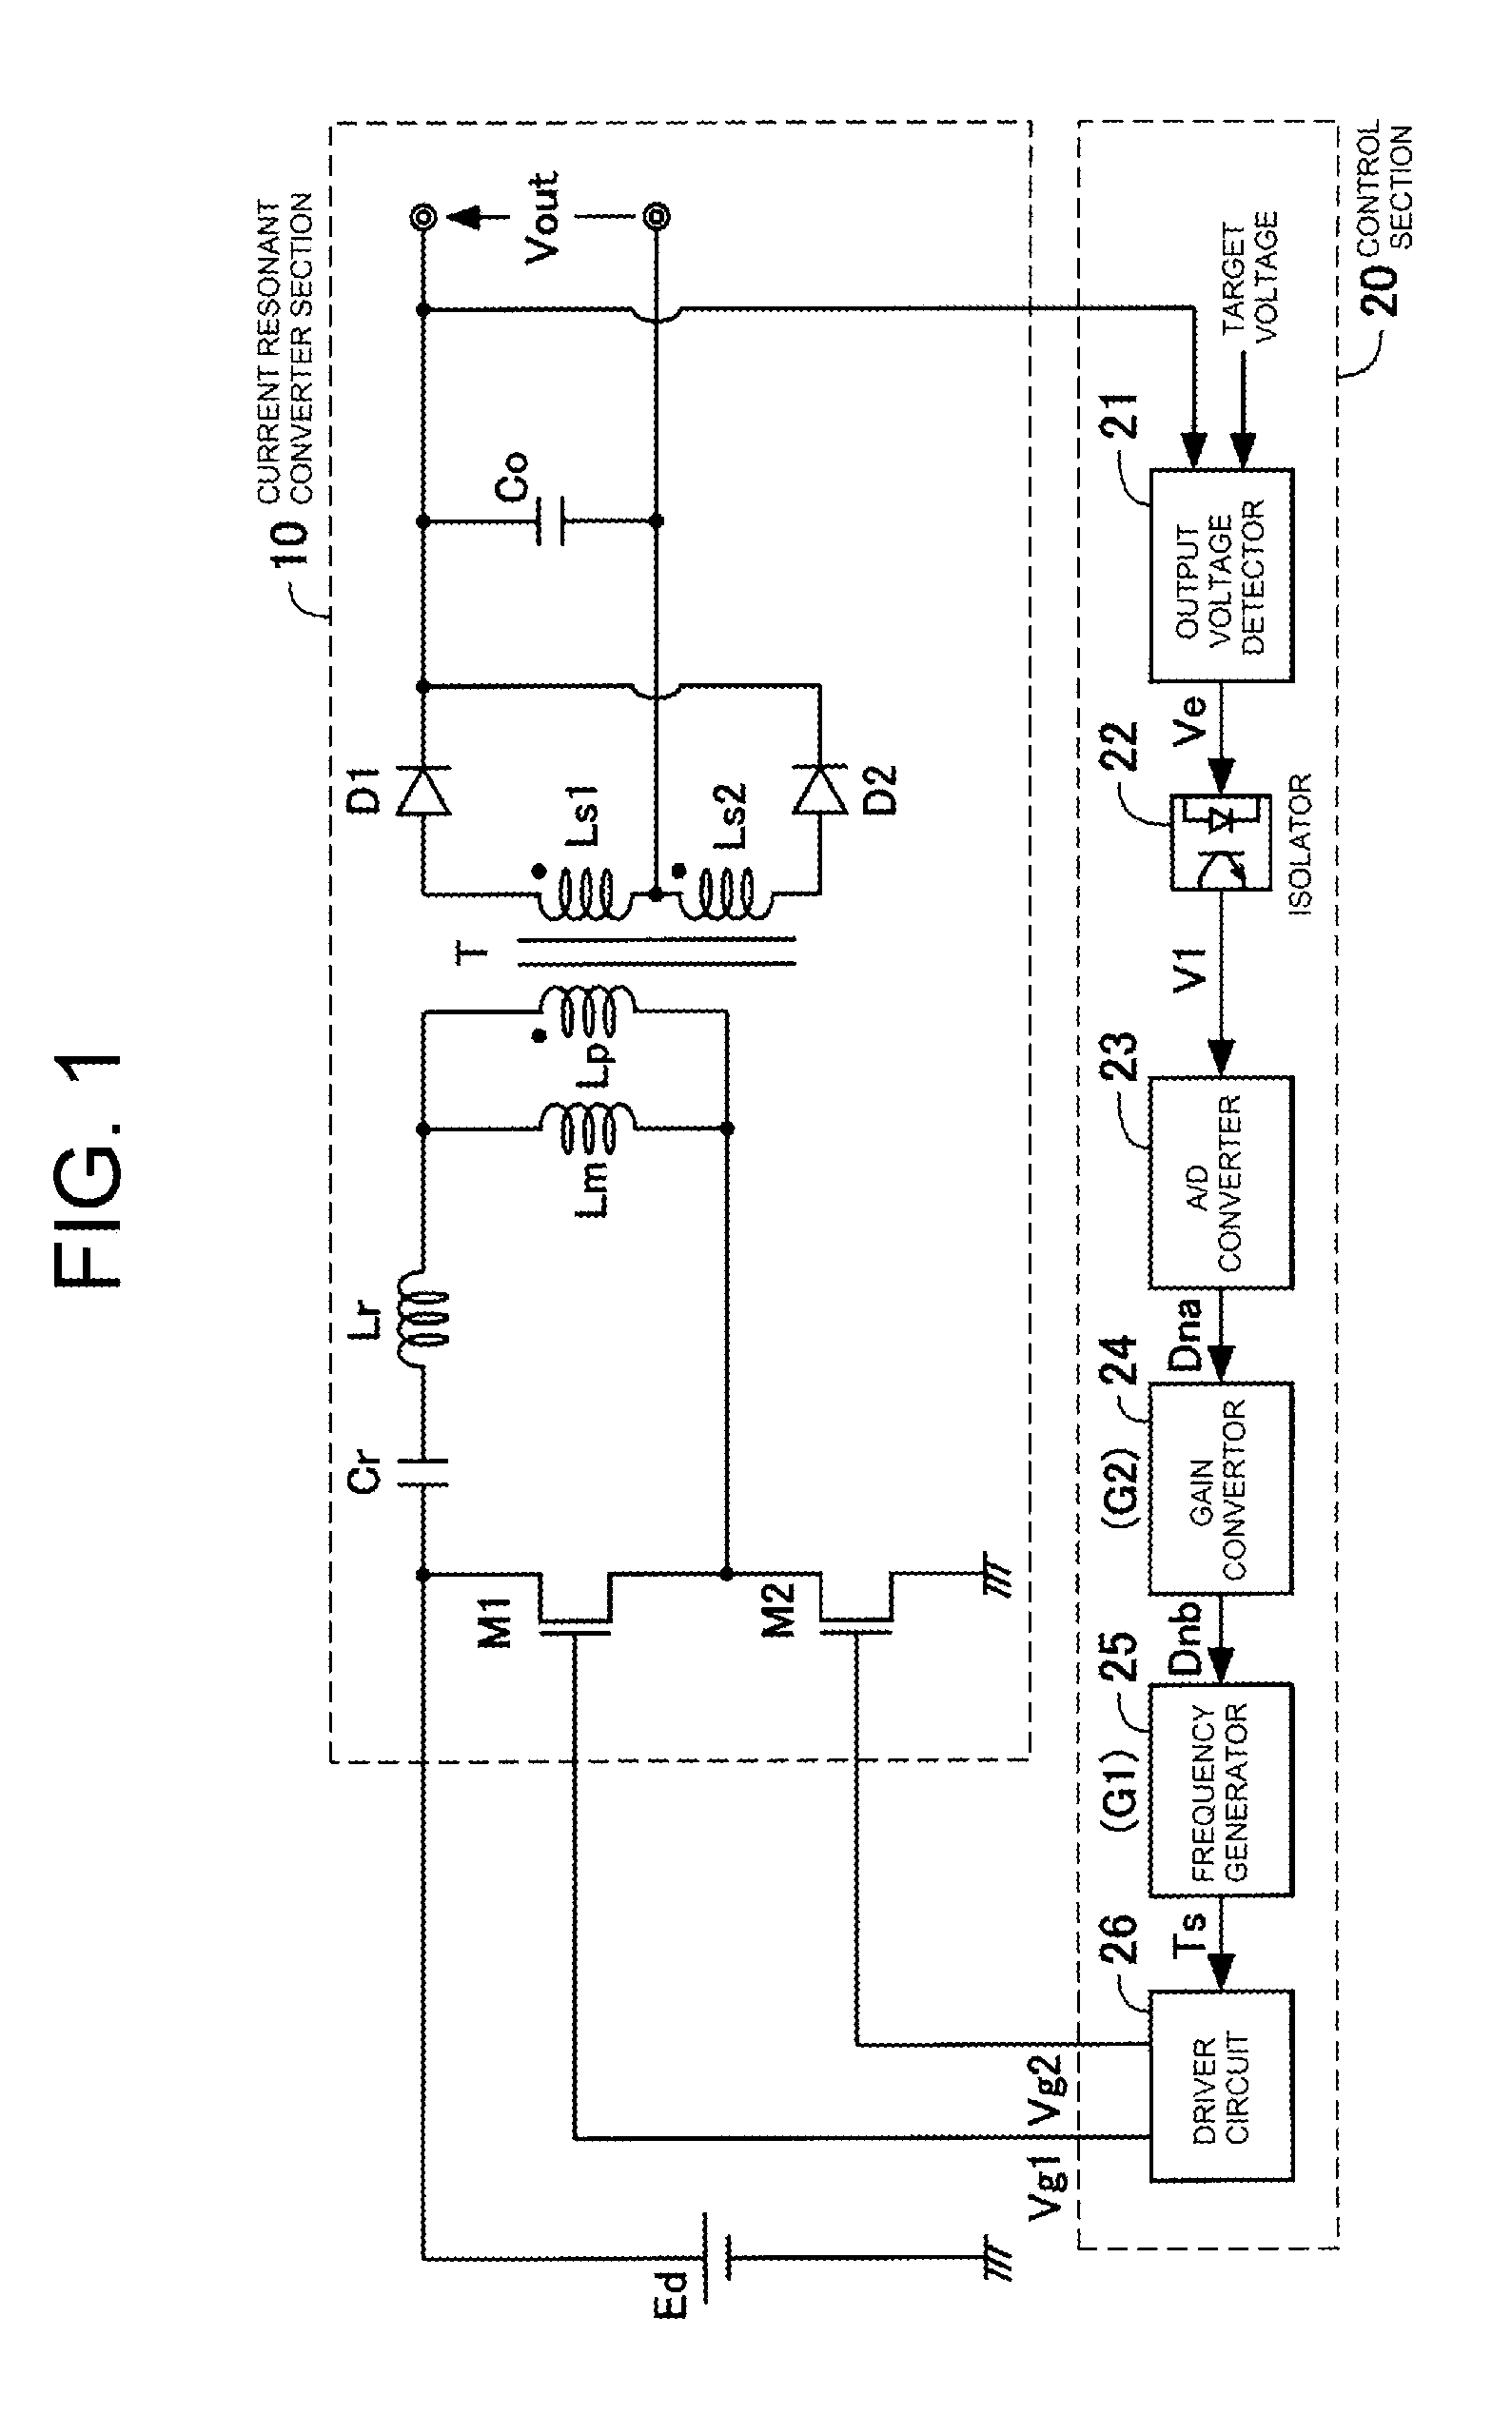 Control device of a switching power supply